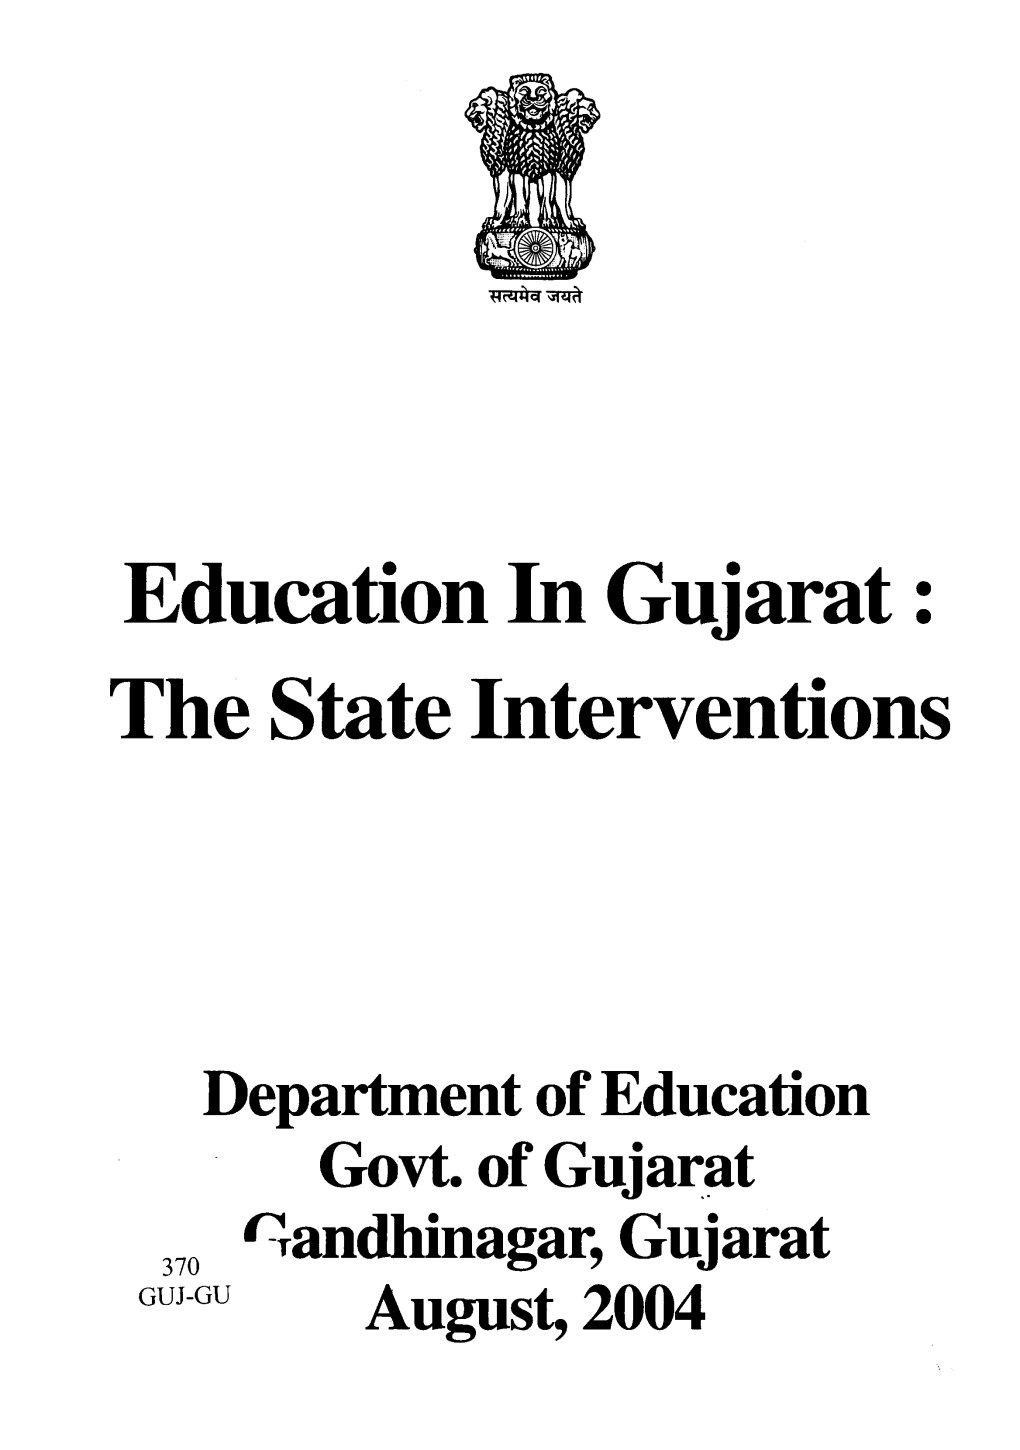 Education in Gujarat: the State Interventions